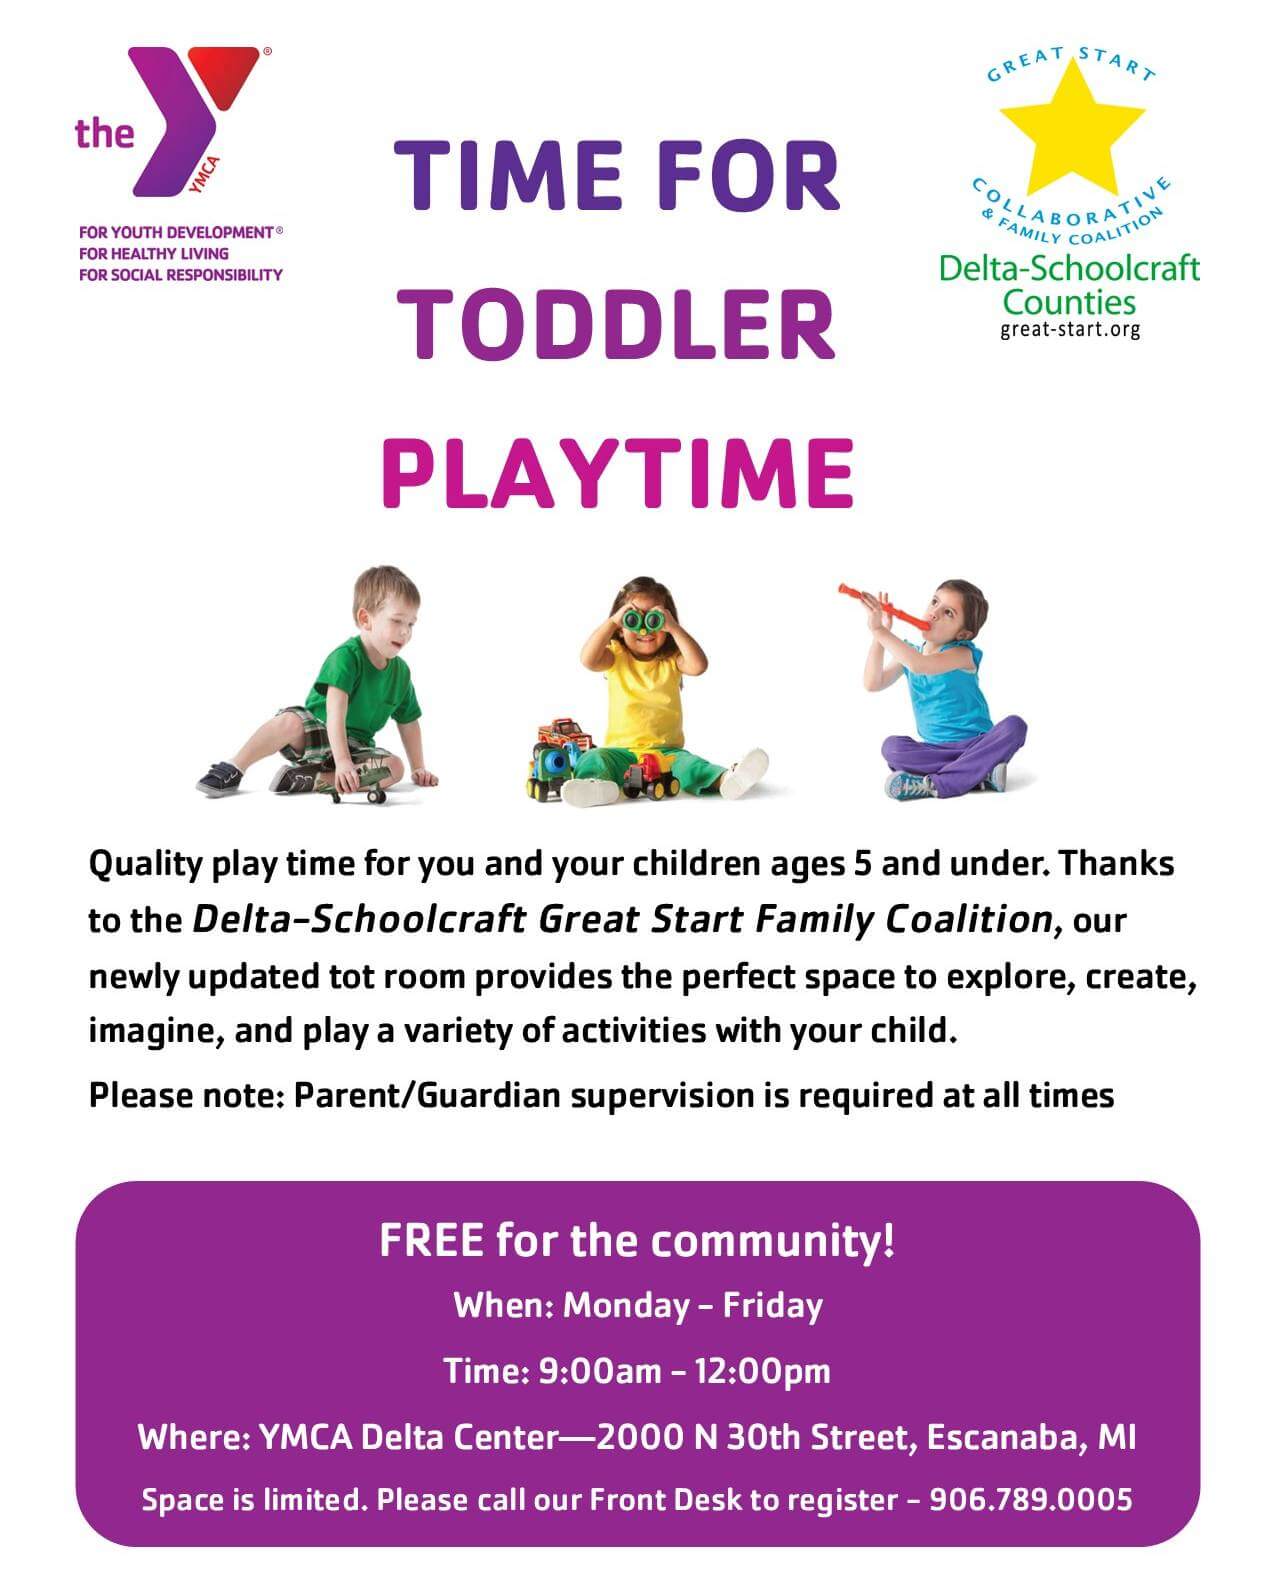 Time for Toddler Playtime. Quality play time for you and your children ages 5 and under. Thanks to the Delta-Schoolcraft Great Start Family Coalition, our newly updated tot room provides the perfect space to explore, create, imagine, and play a variety of activities with your child. Please note: Parent/ Guardian supervision is required at all times. Free for the community! When: Monday-Friday; time: 9:00 a.m.- 12:00 p.m. Where: YMCA Delta Center-2000 N. 30th Street, Escanaba, MI. Space is limited. Please call our Front Desk to register- 906.789.005